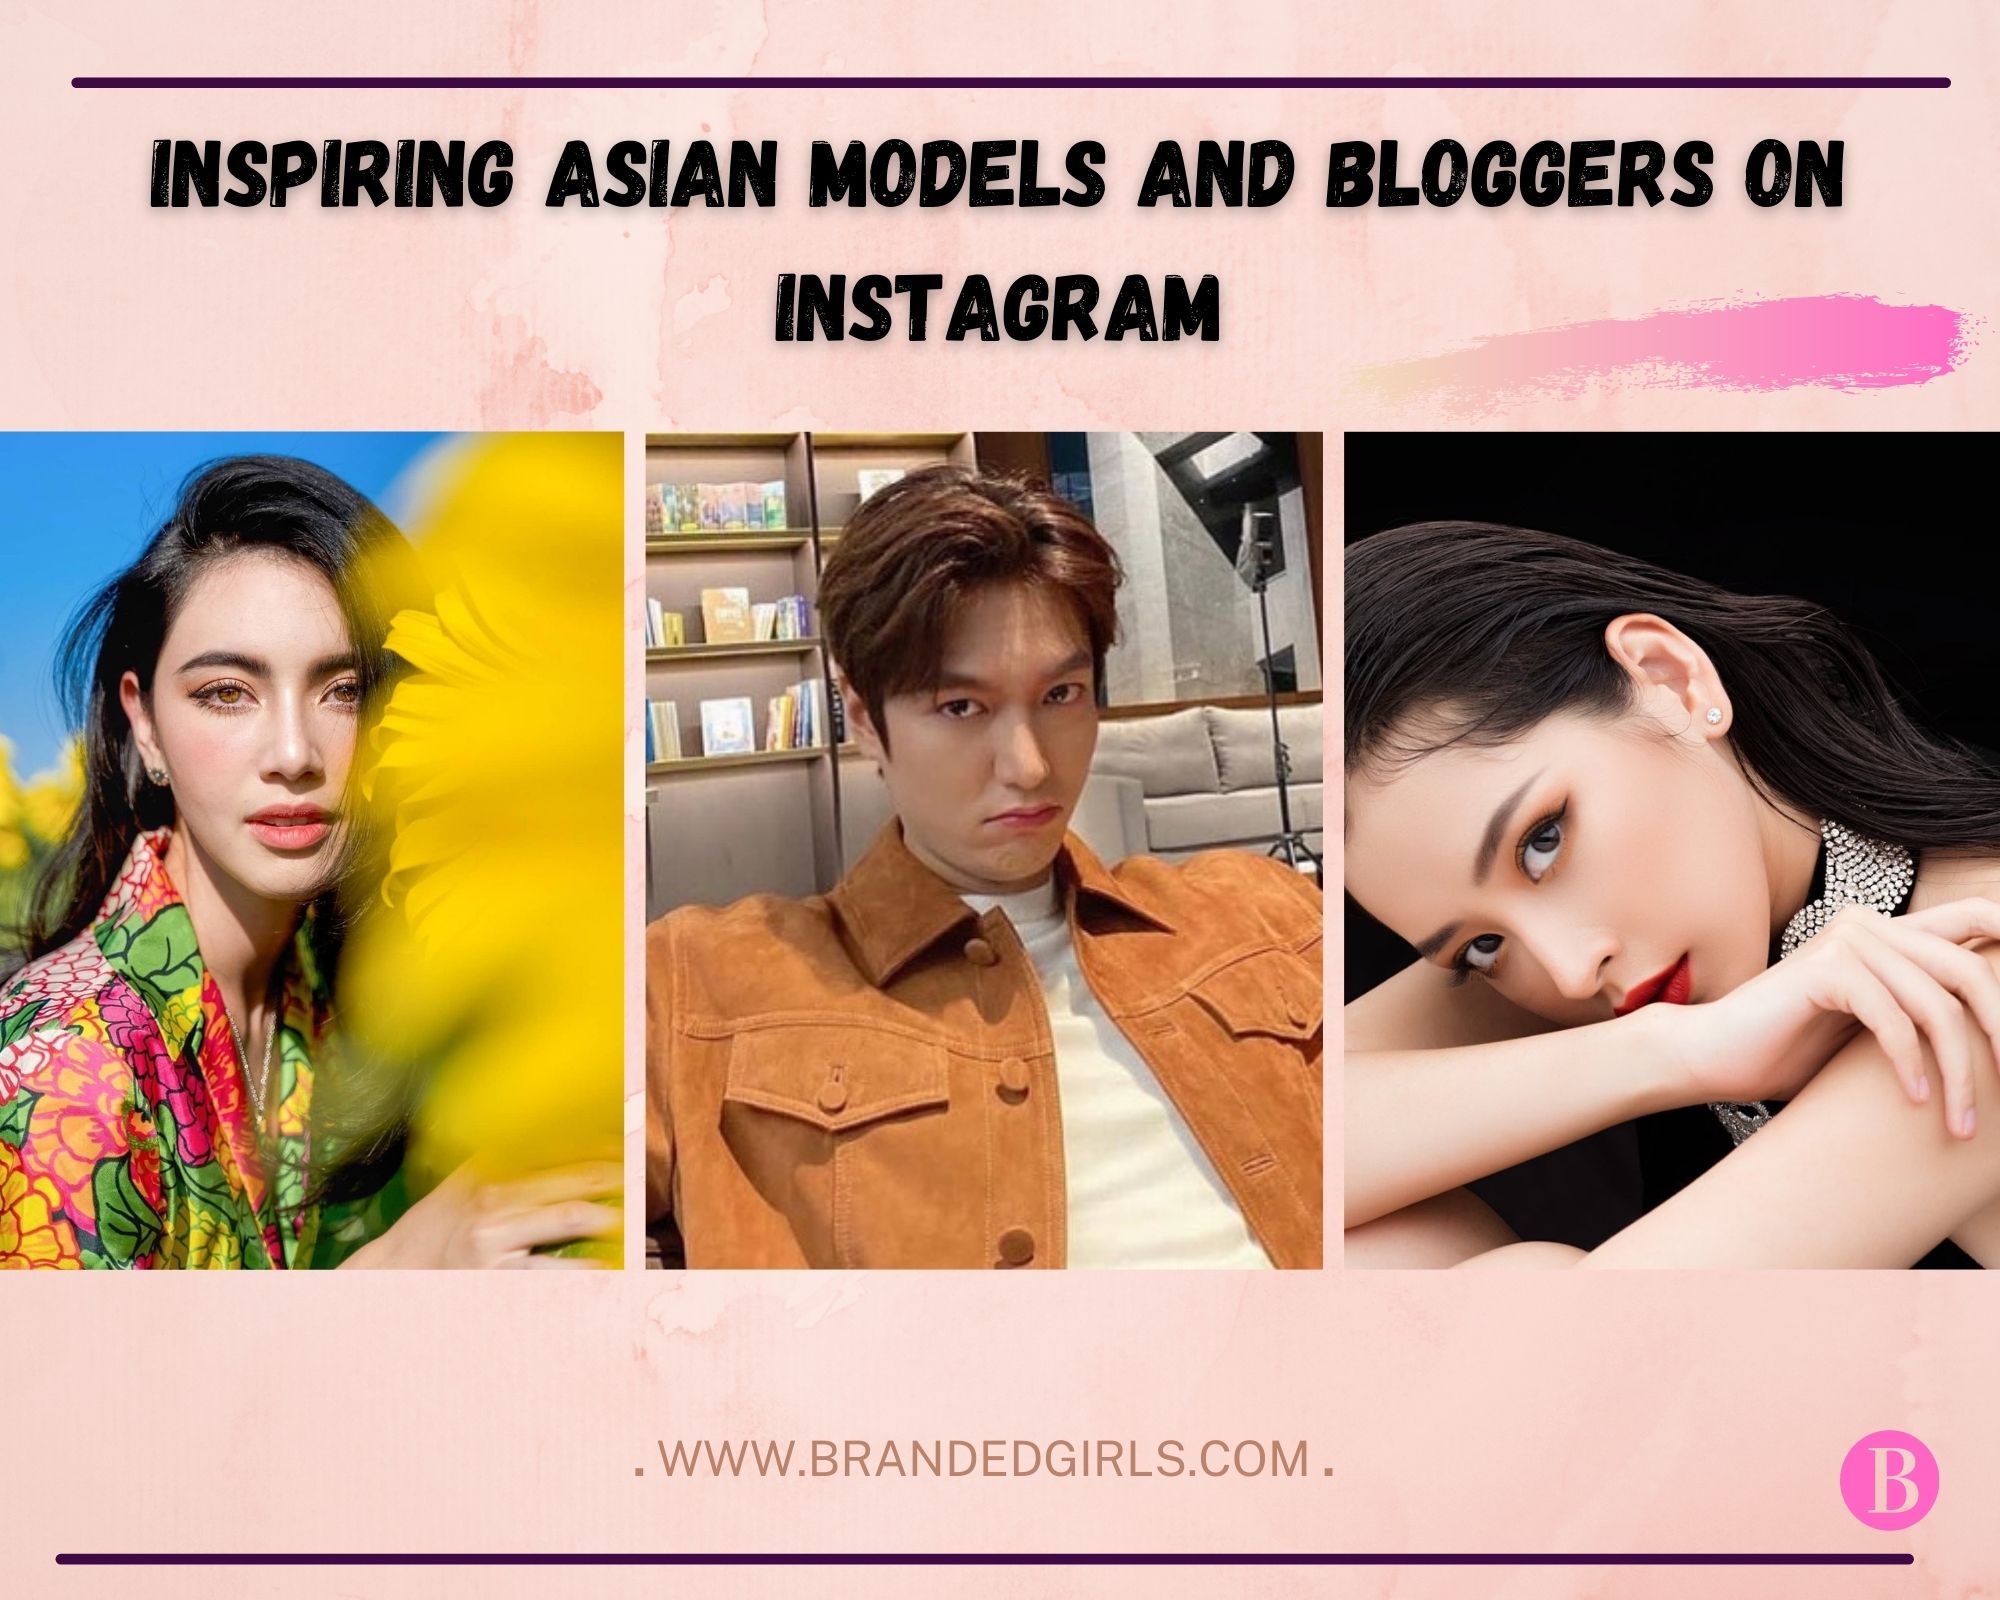 Top 20 Asian Models And Bloggers On Instagram To Follow